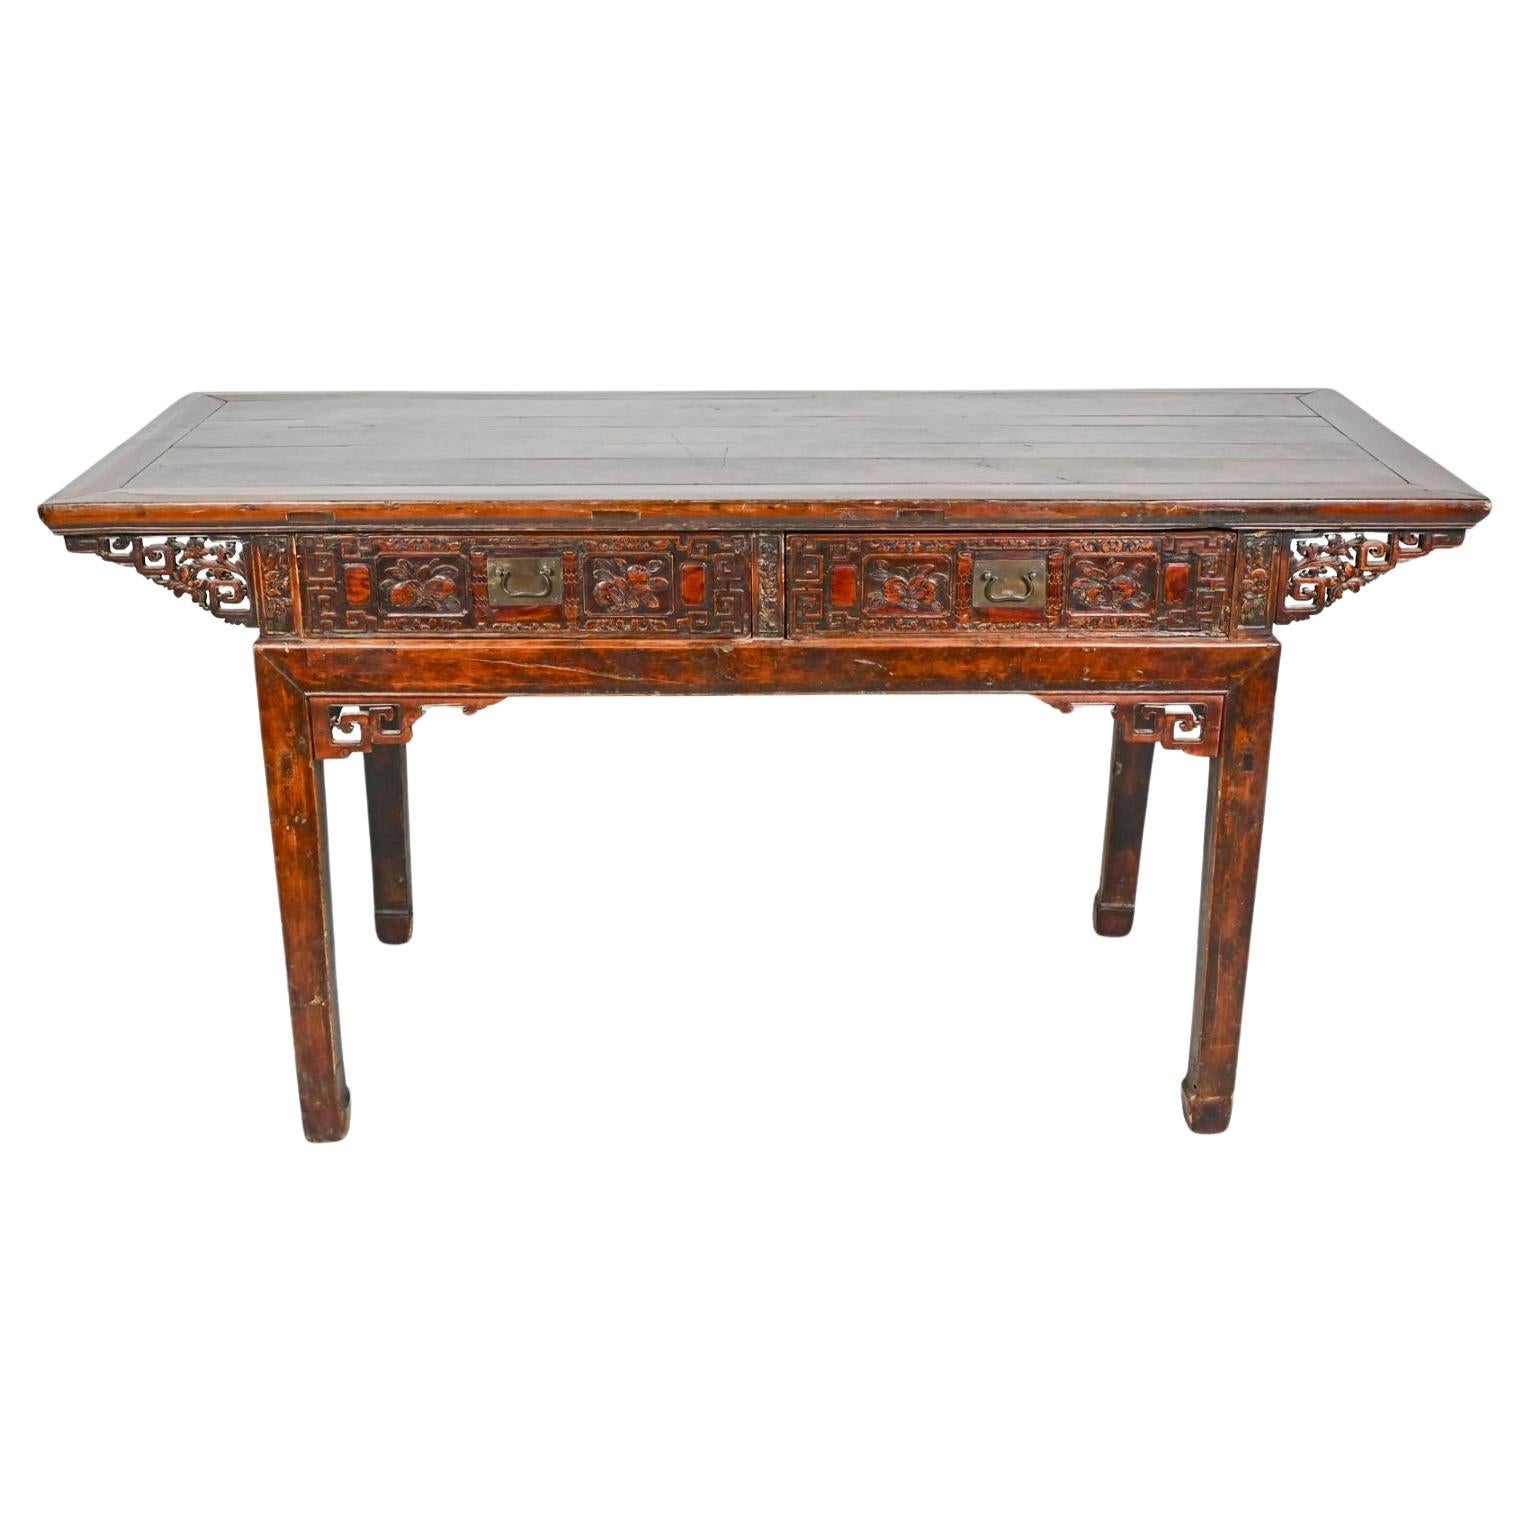 Antique Chinese Carved Altar Table / Desk